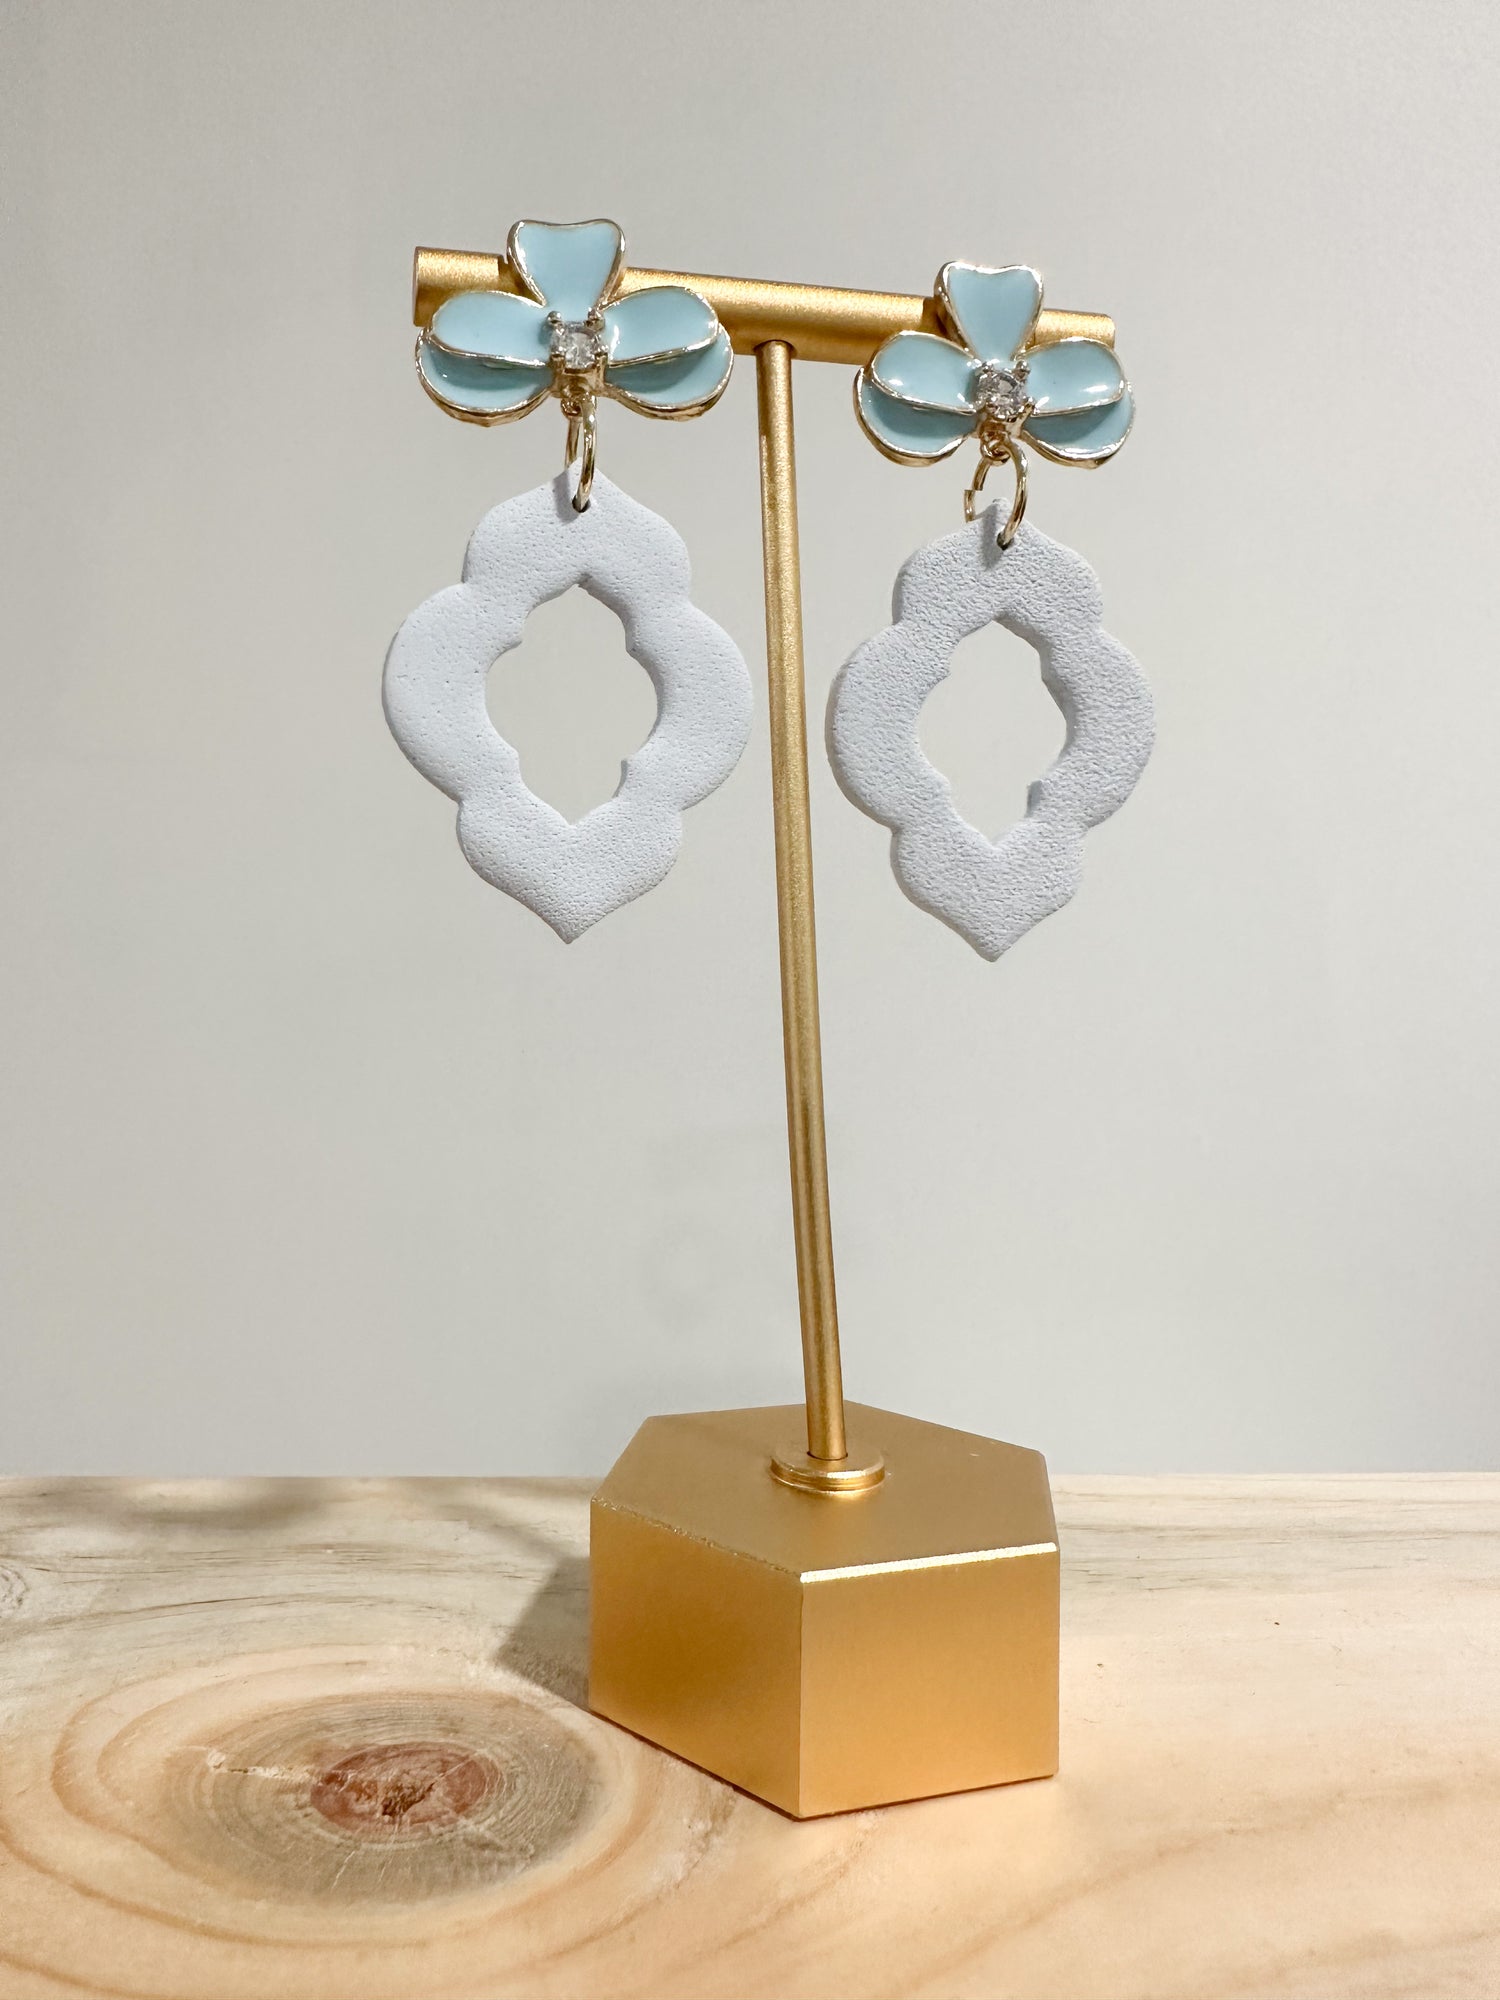 Handcrafted polymer clay earrings with intricate design and 18k gold plated earring posts